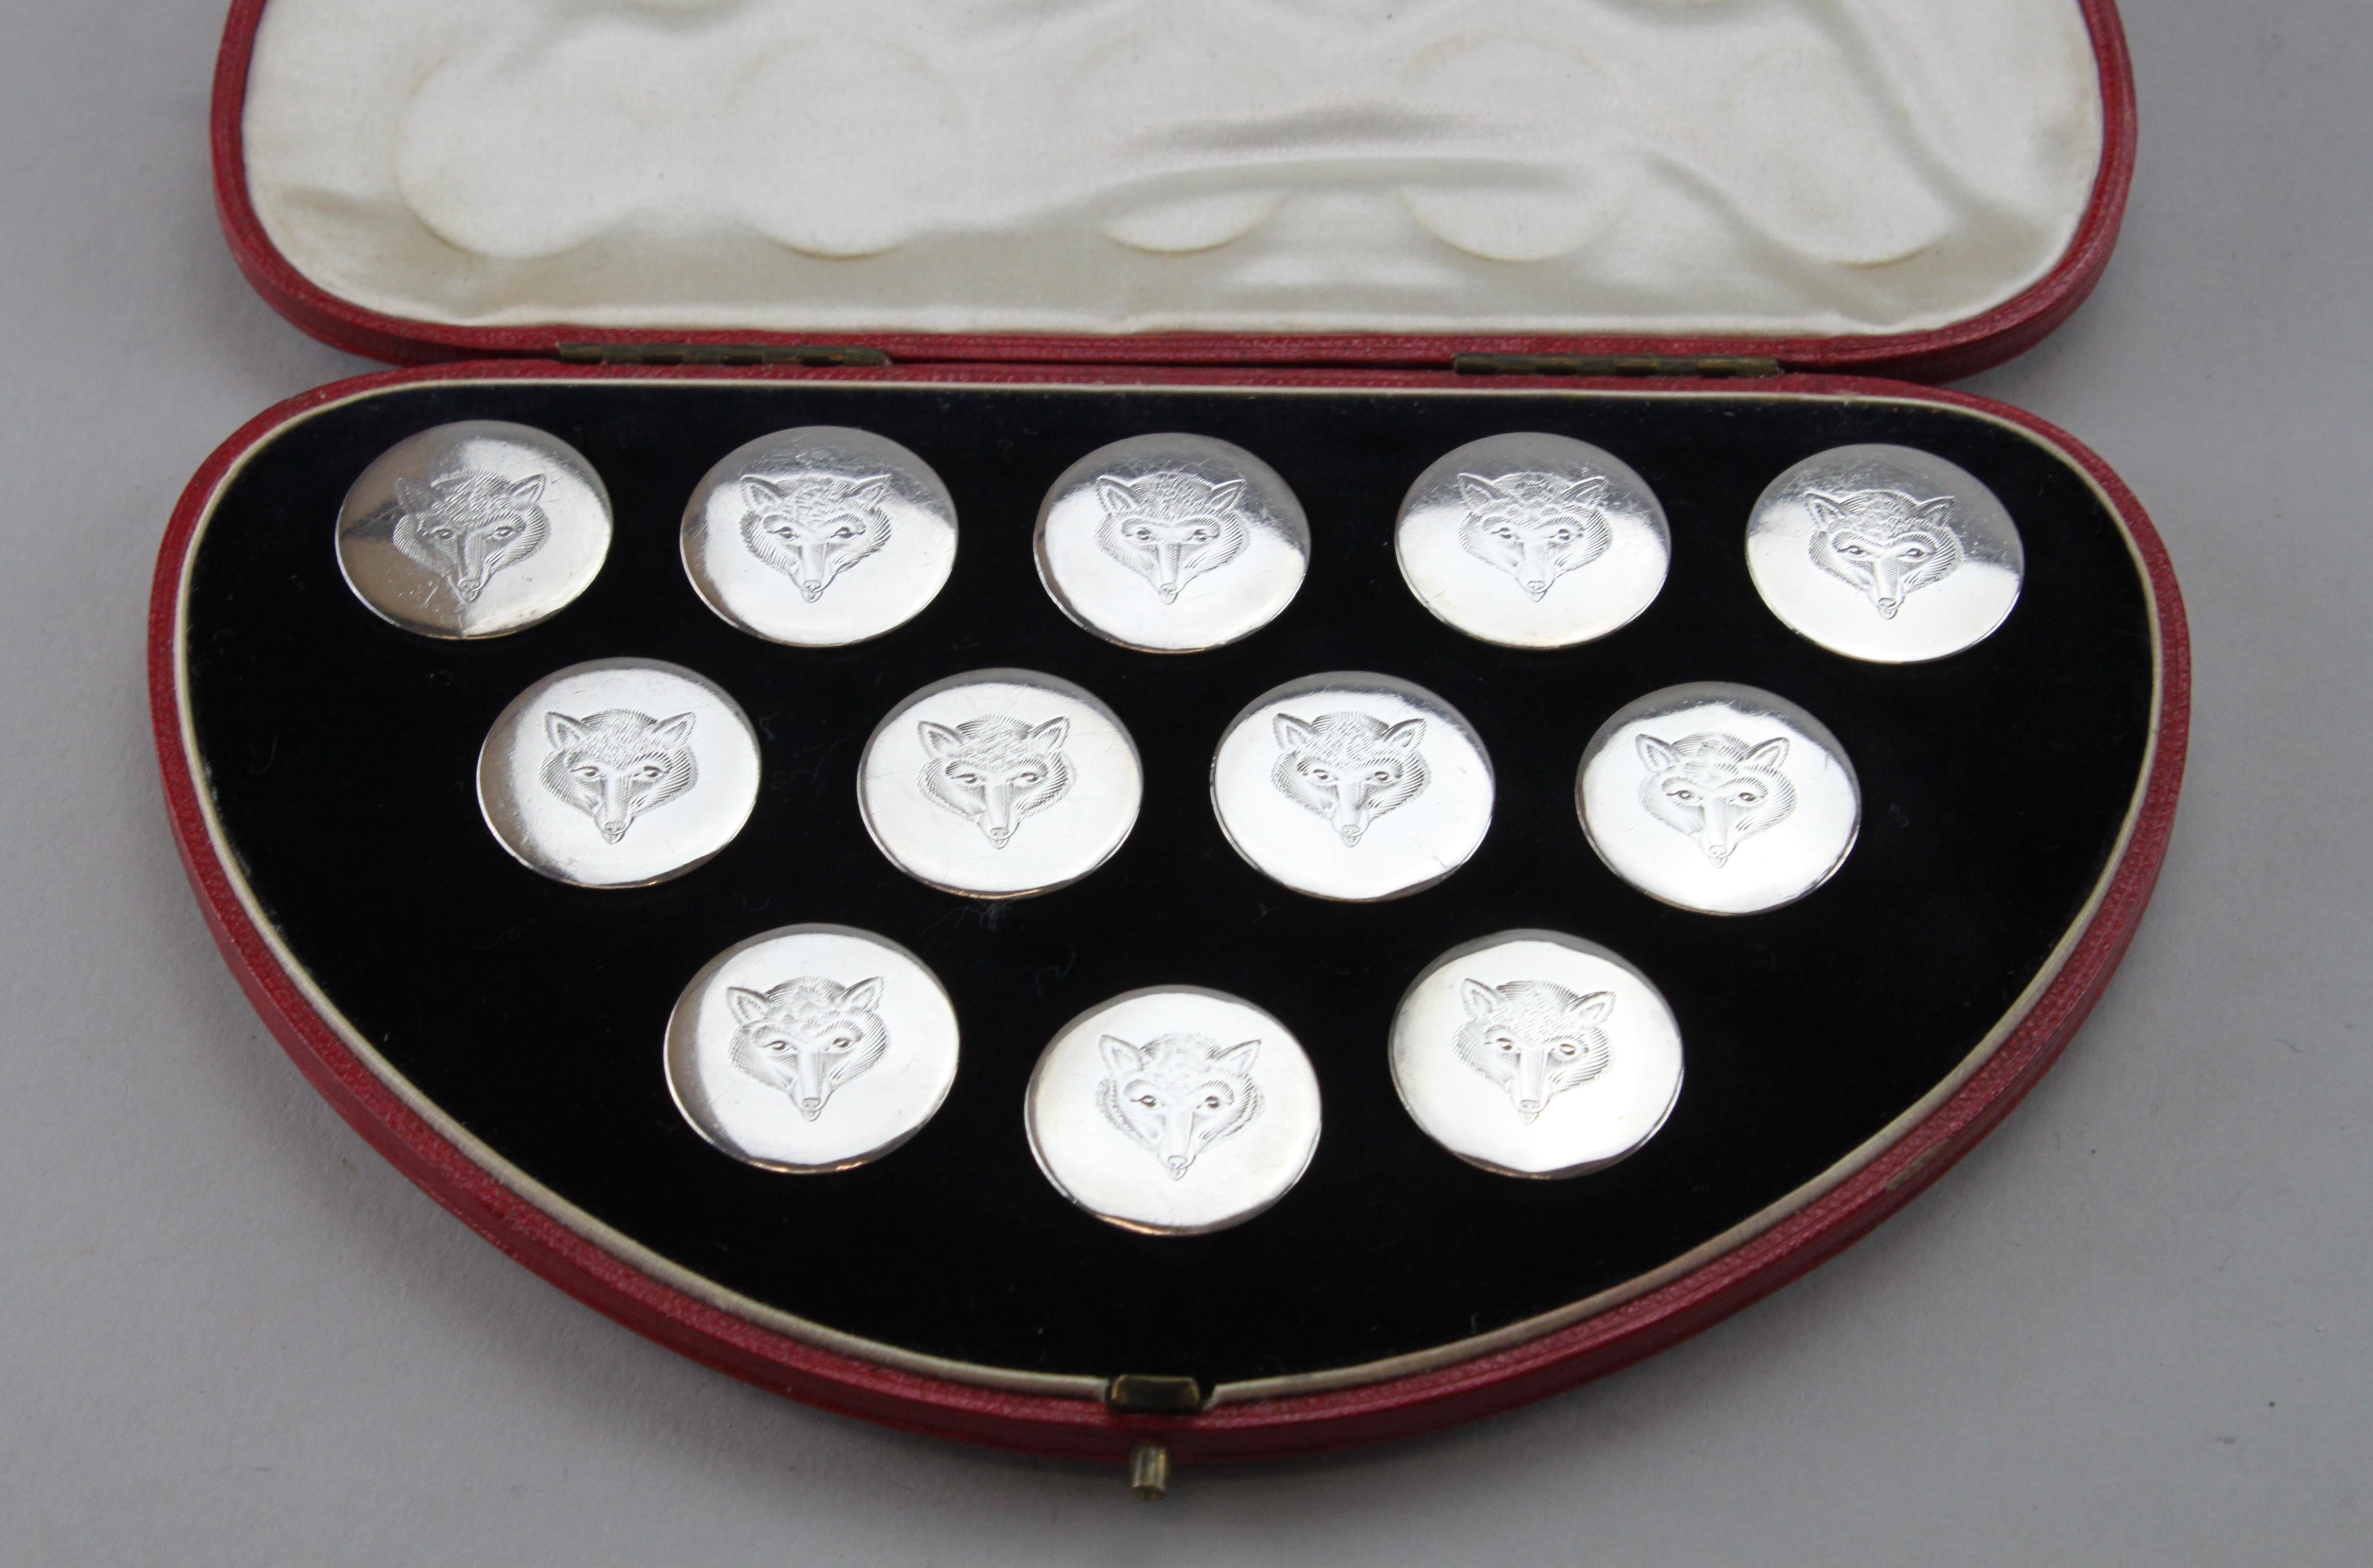 Antique Georgian sterling silver set of 12 shirt buttons.
Made in London circa 1790.
Maker : John Rich
Fully Hallmarked

Dimensions - 
Diameter x height : 1.5 x 0.7 cm
Total weight approx 60 grams

Condition: Has some surface wear and tear